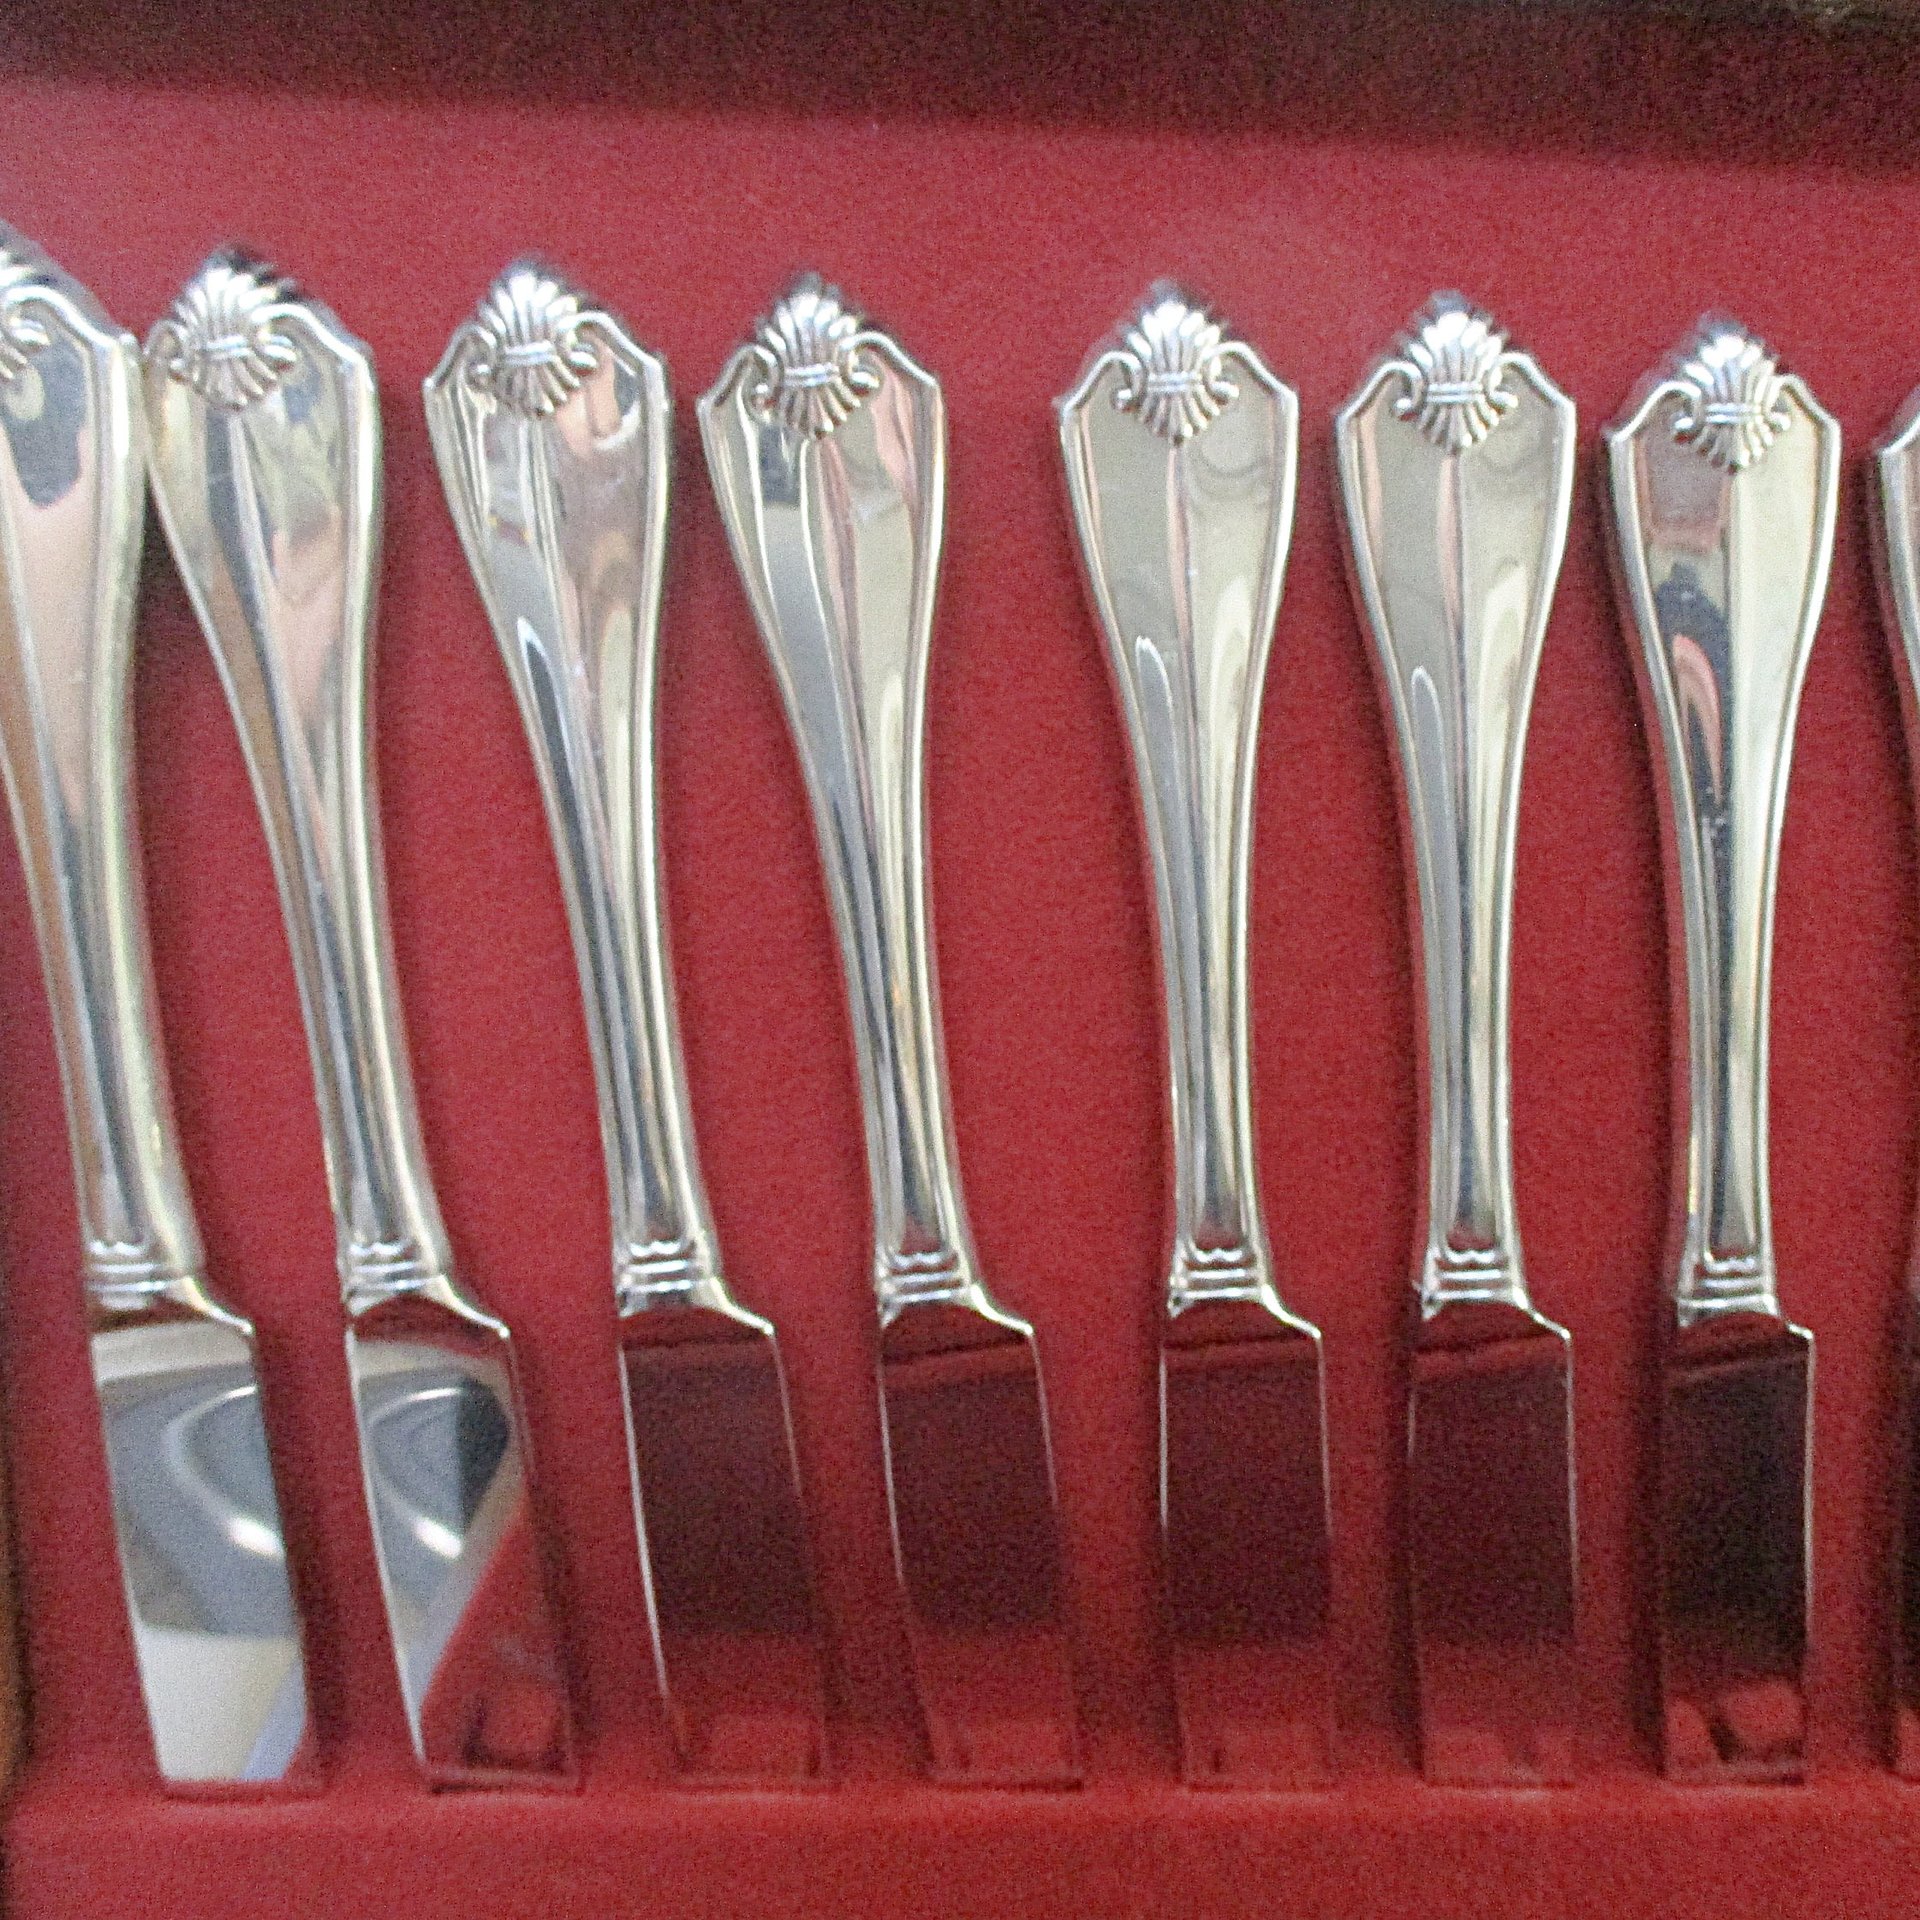 King James Silver Plate 8 Place Settings Oneida, 57pcs, Silverware Flatware, Hostess Set, 12 Extra Teaspoons, Excellent Condition